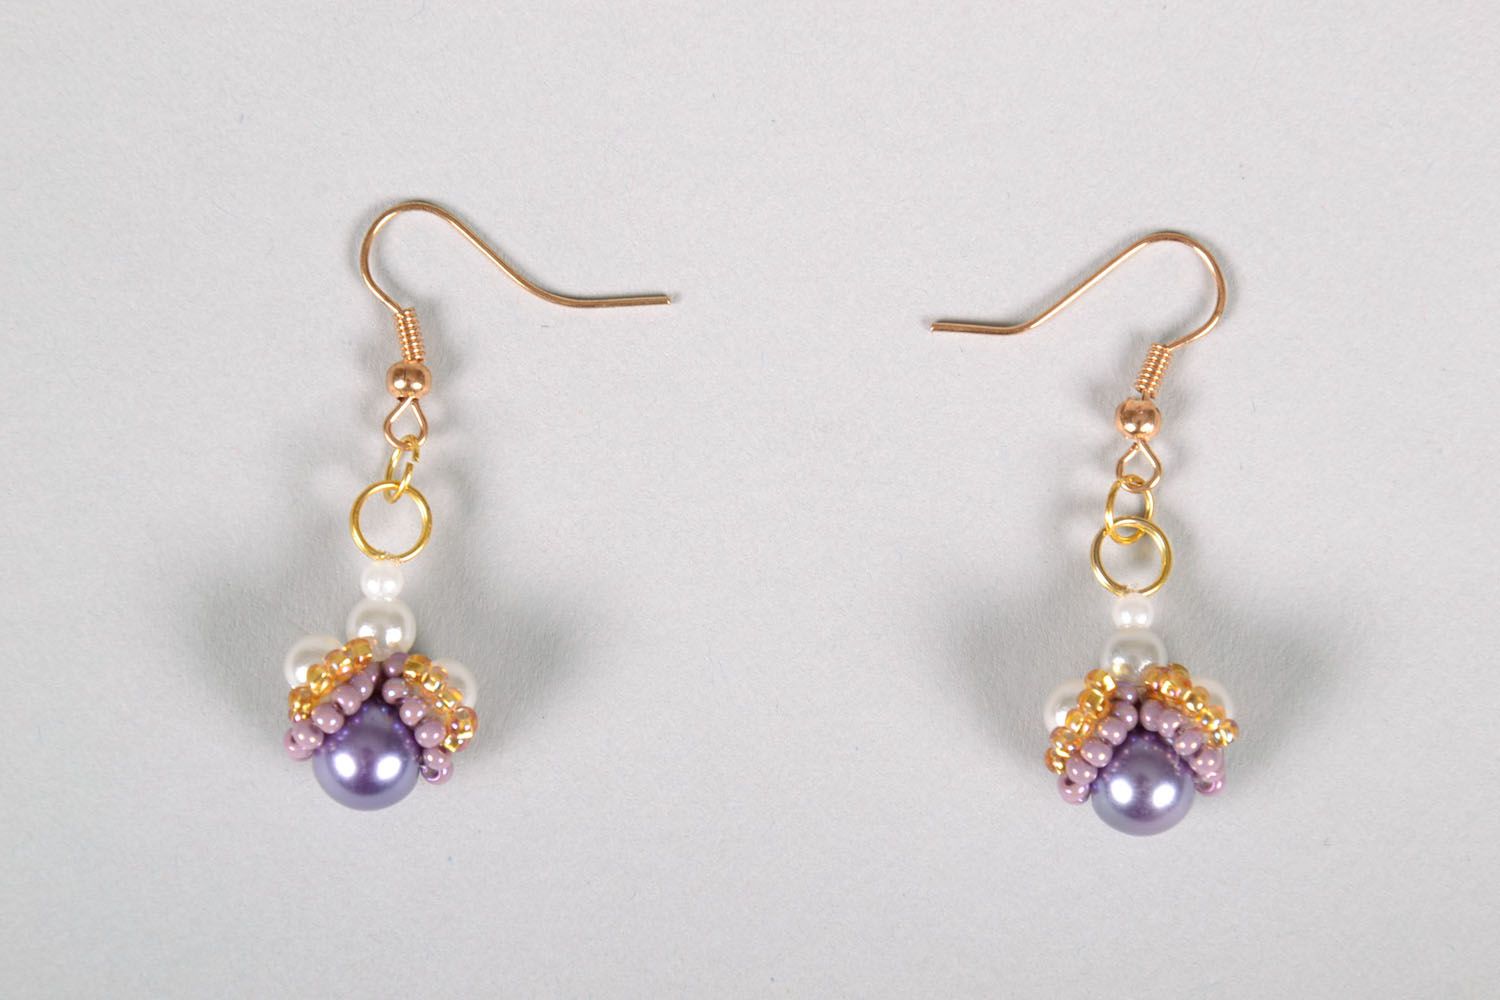 Beaded earrings with charms photo 2